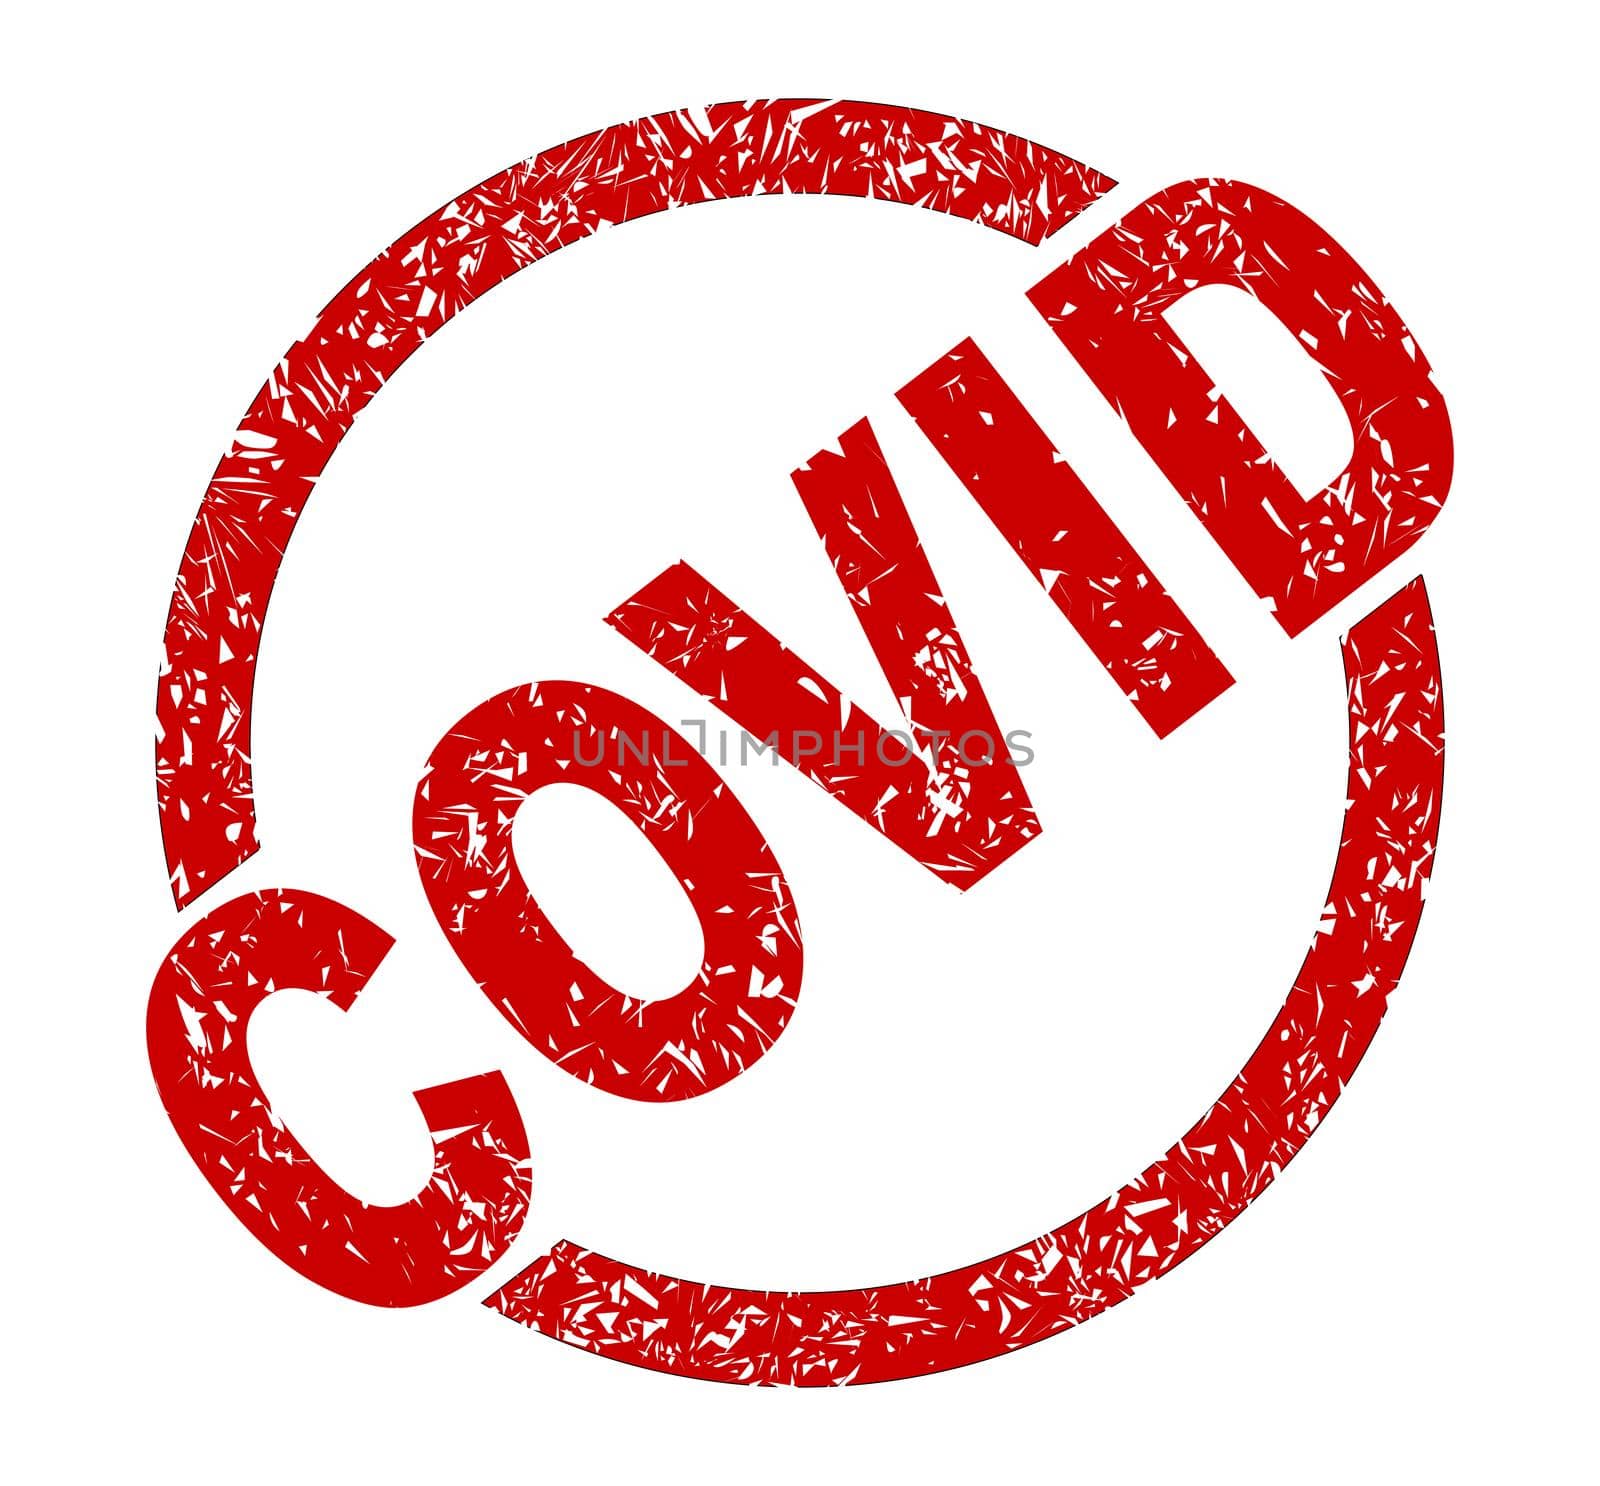 An Covid red ink stamp on a white background